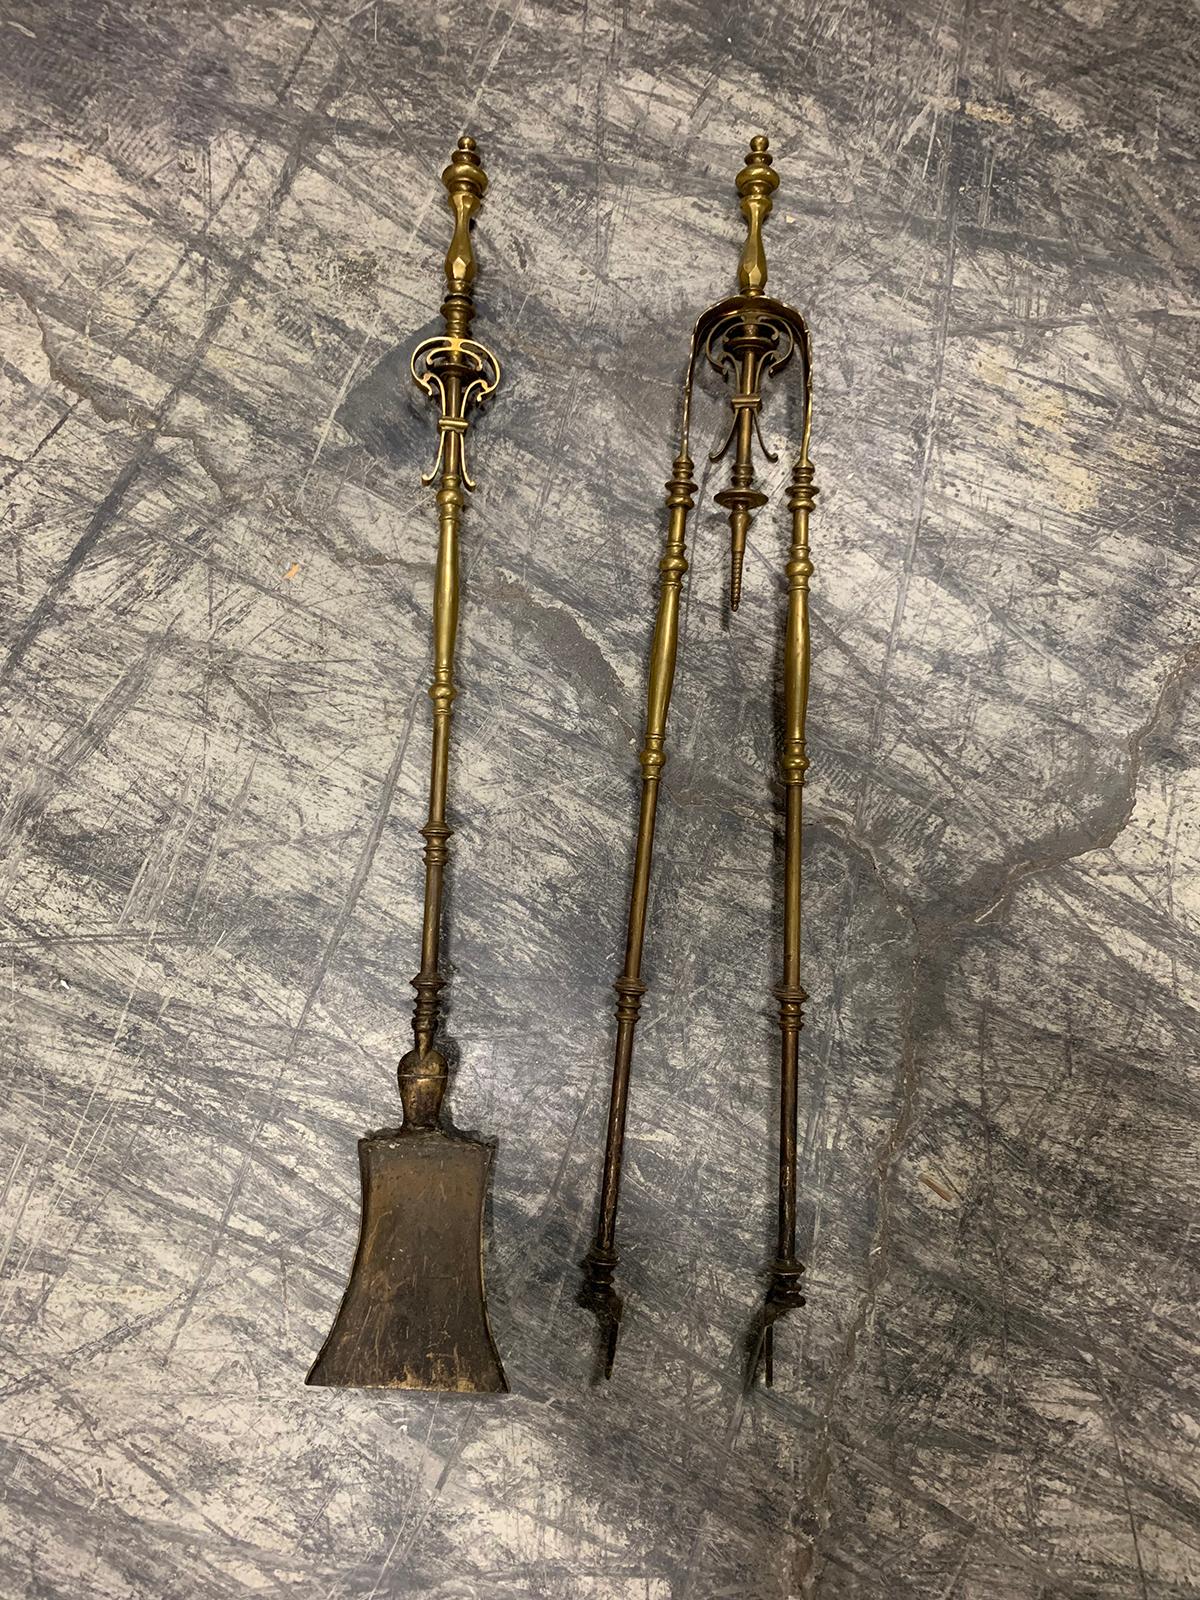 Pair of 19th century brass fire tools, shovel and tongs
Very fine detail.